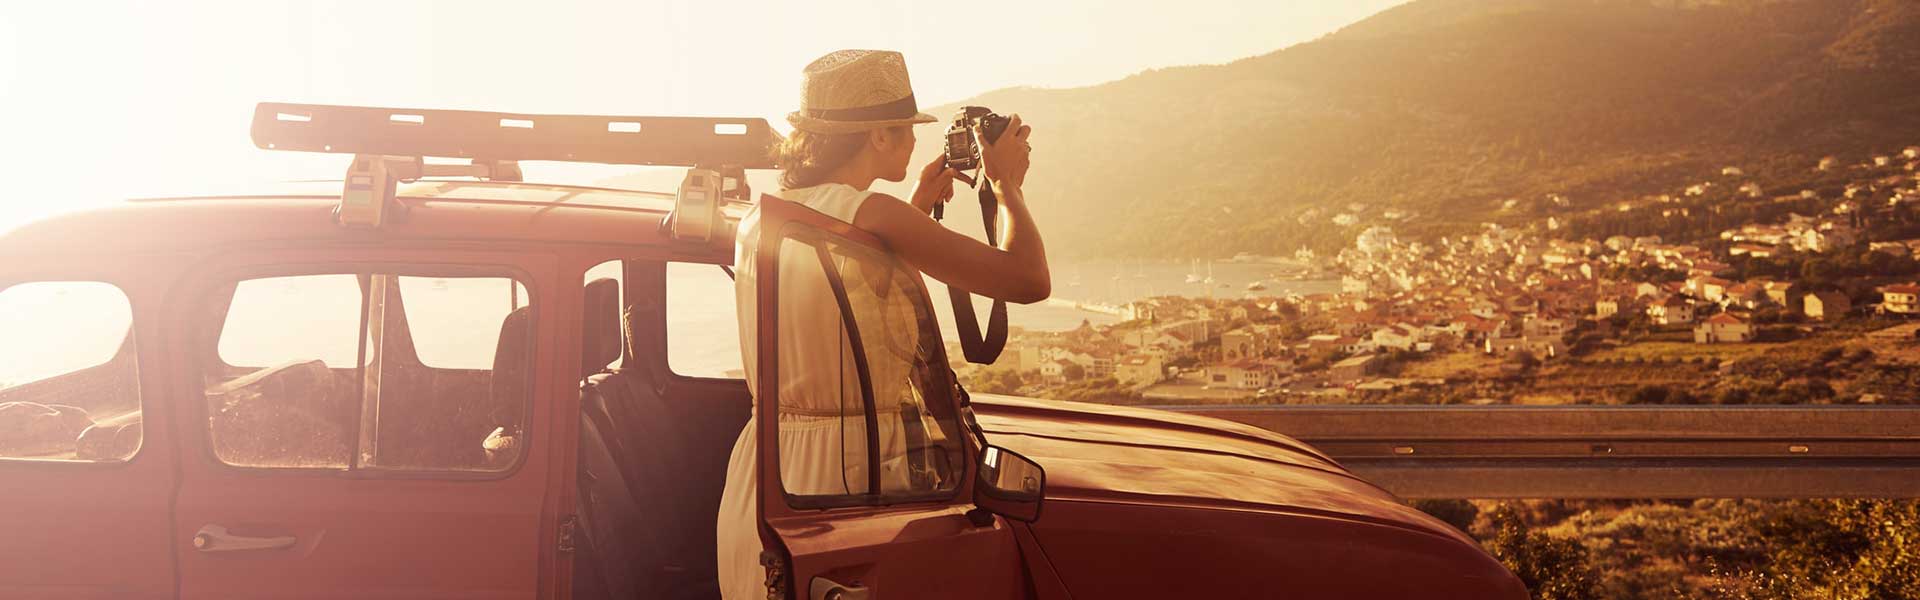 A memorable summer trip with car rental